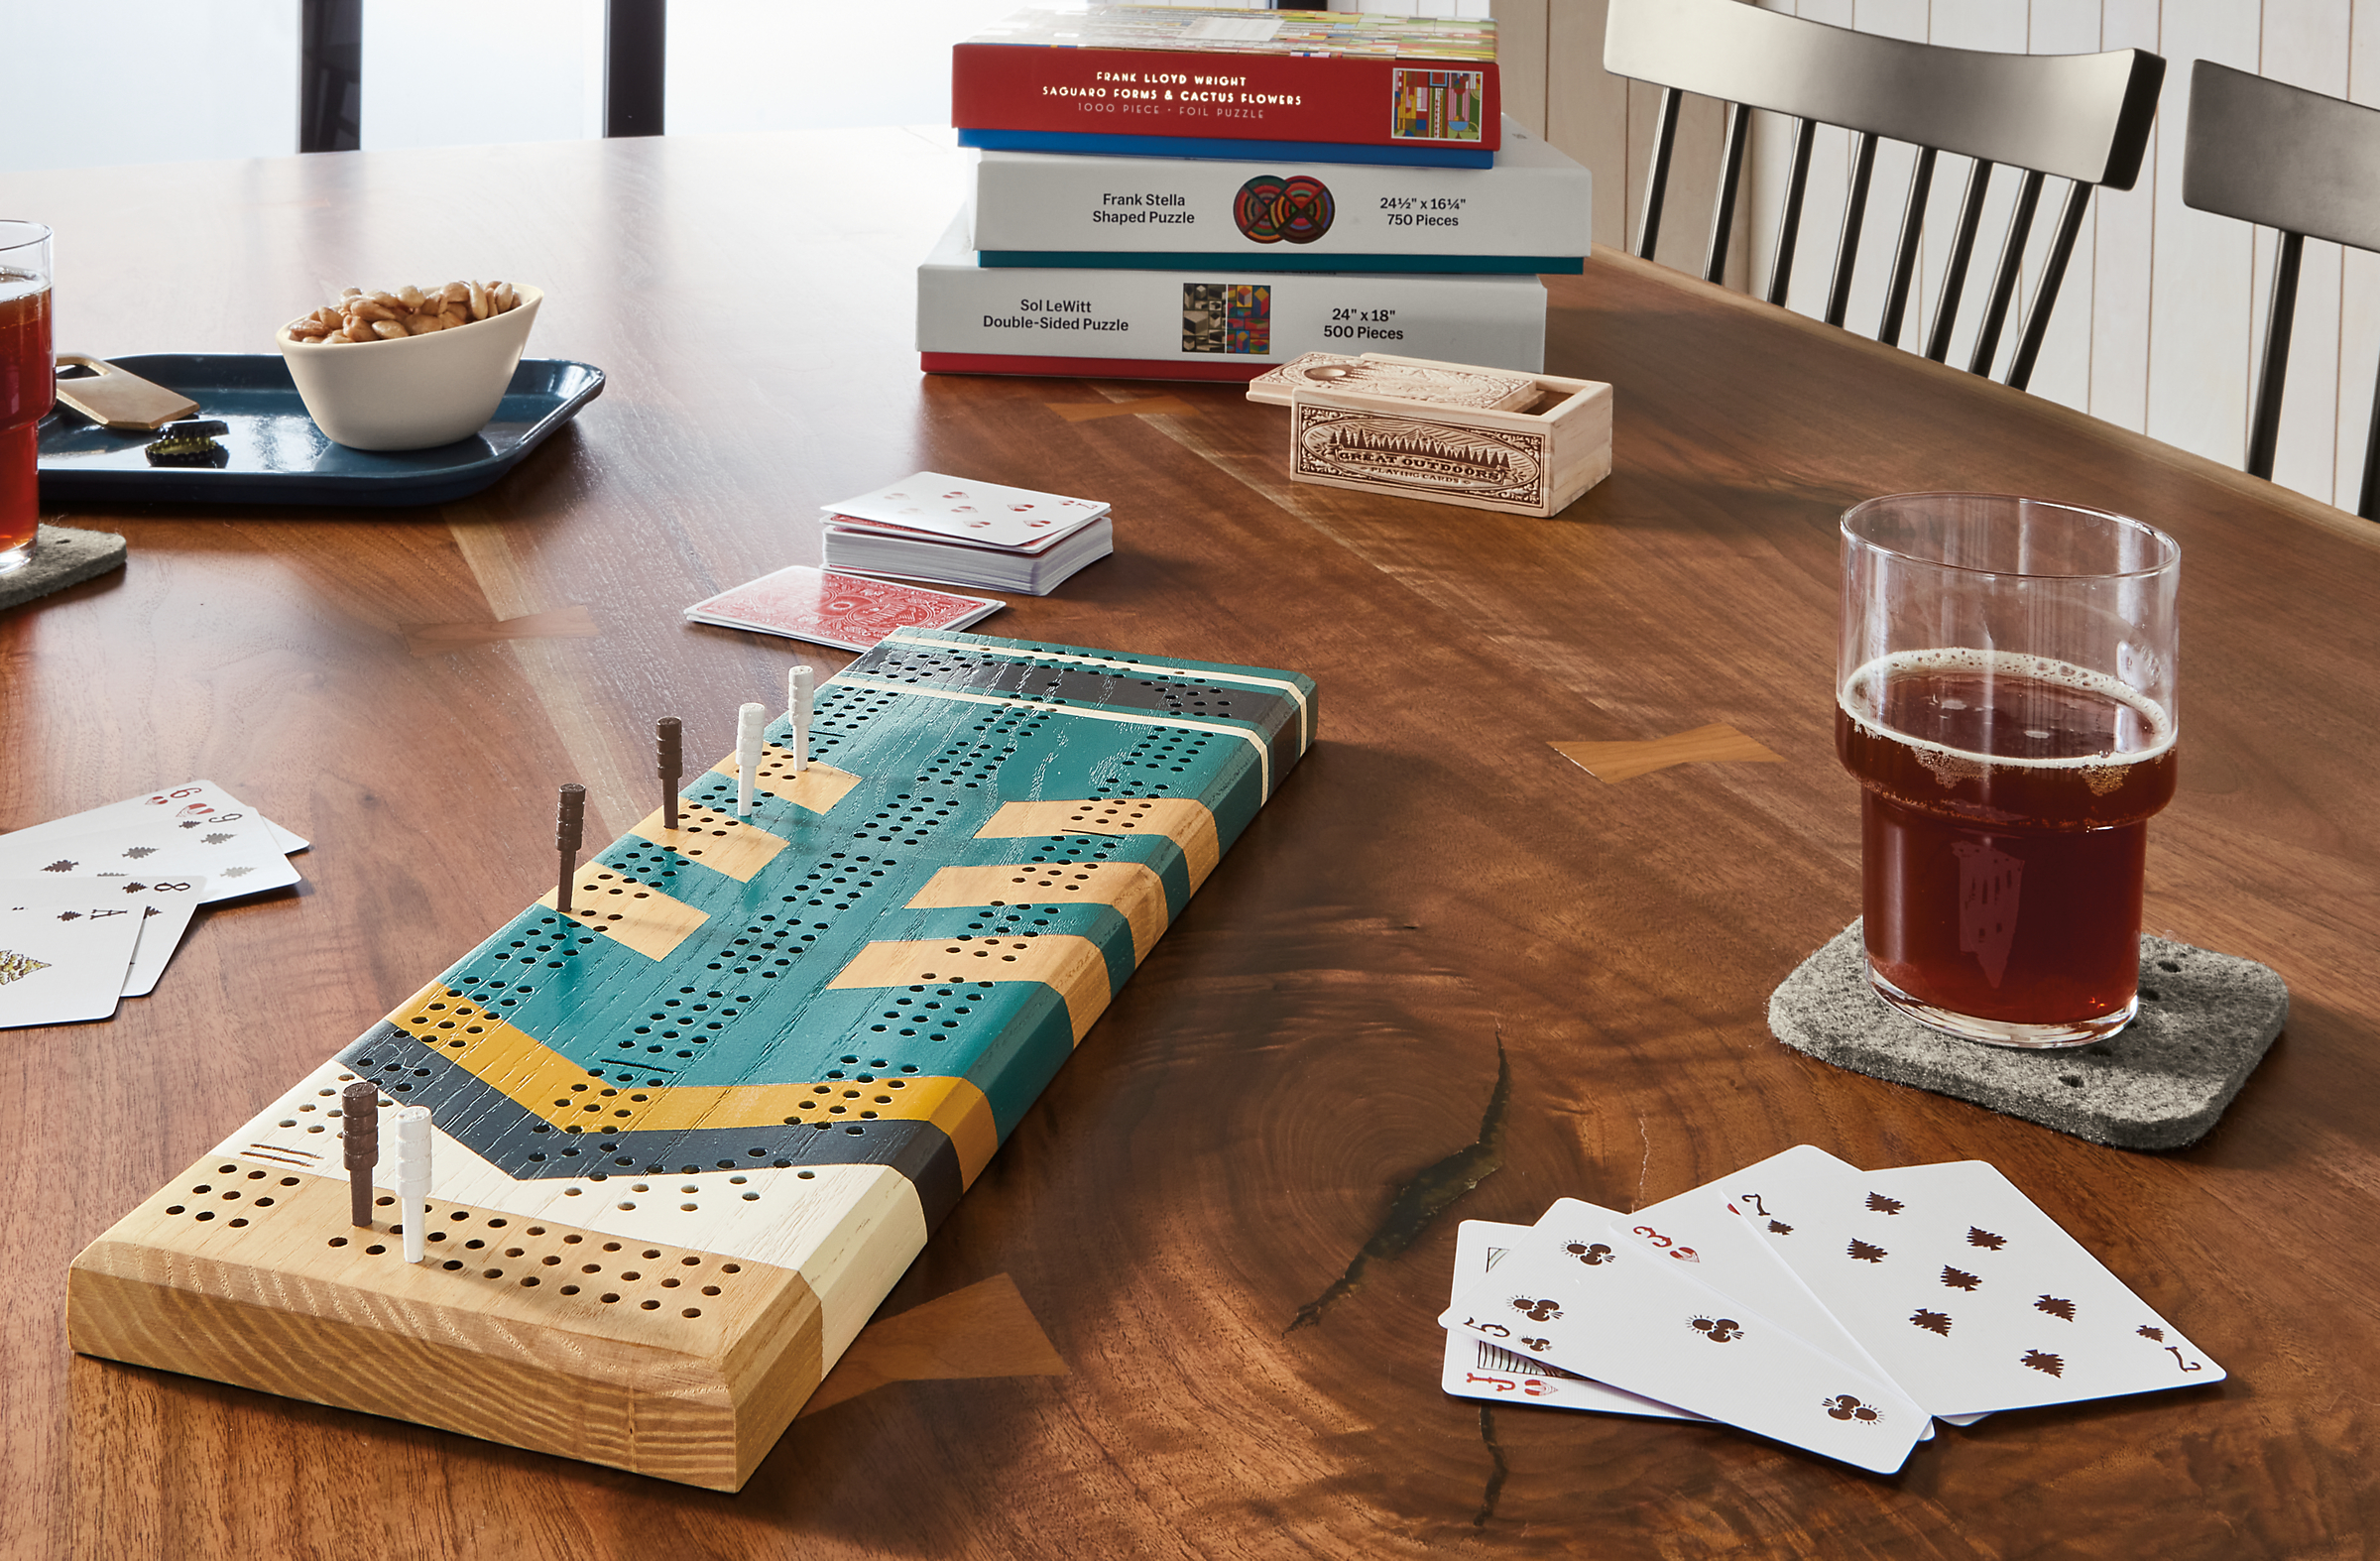 Home décor setting with Portage cribbage board and Great Outdoor playing cards.